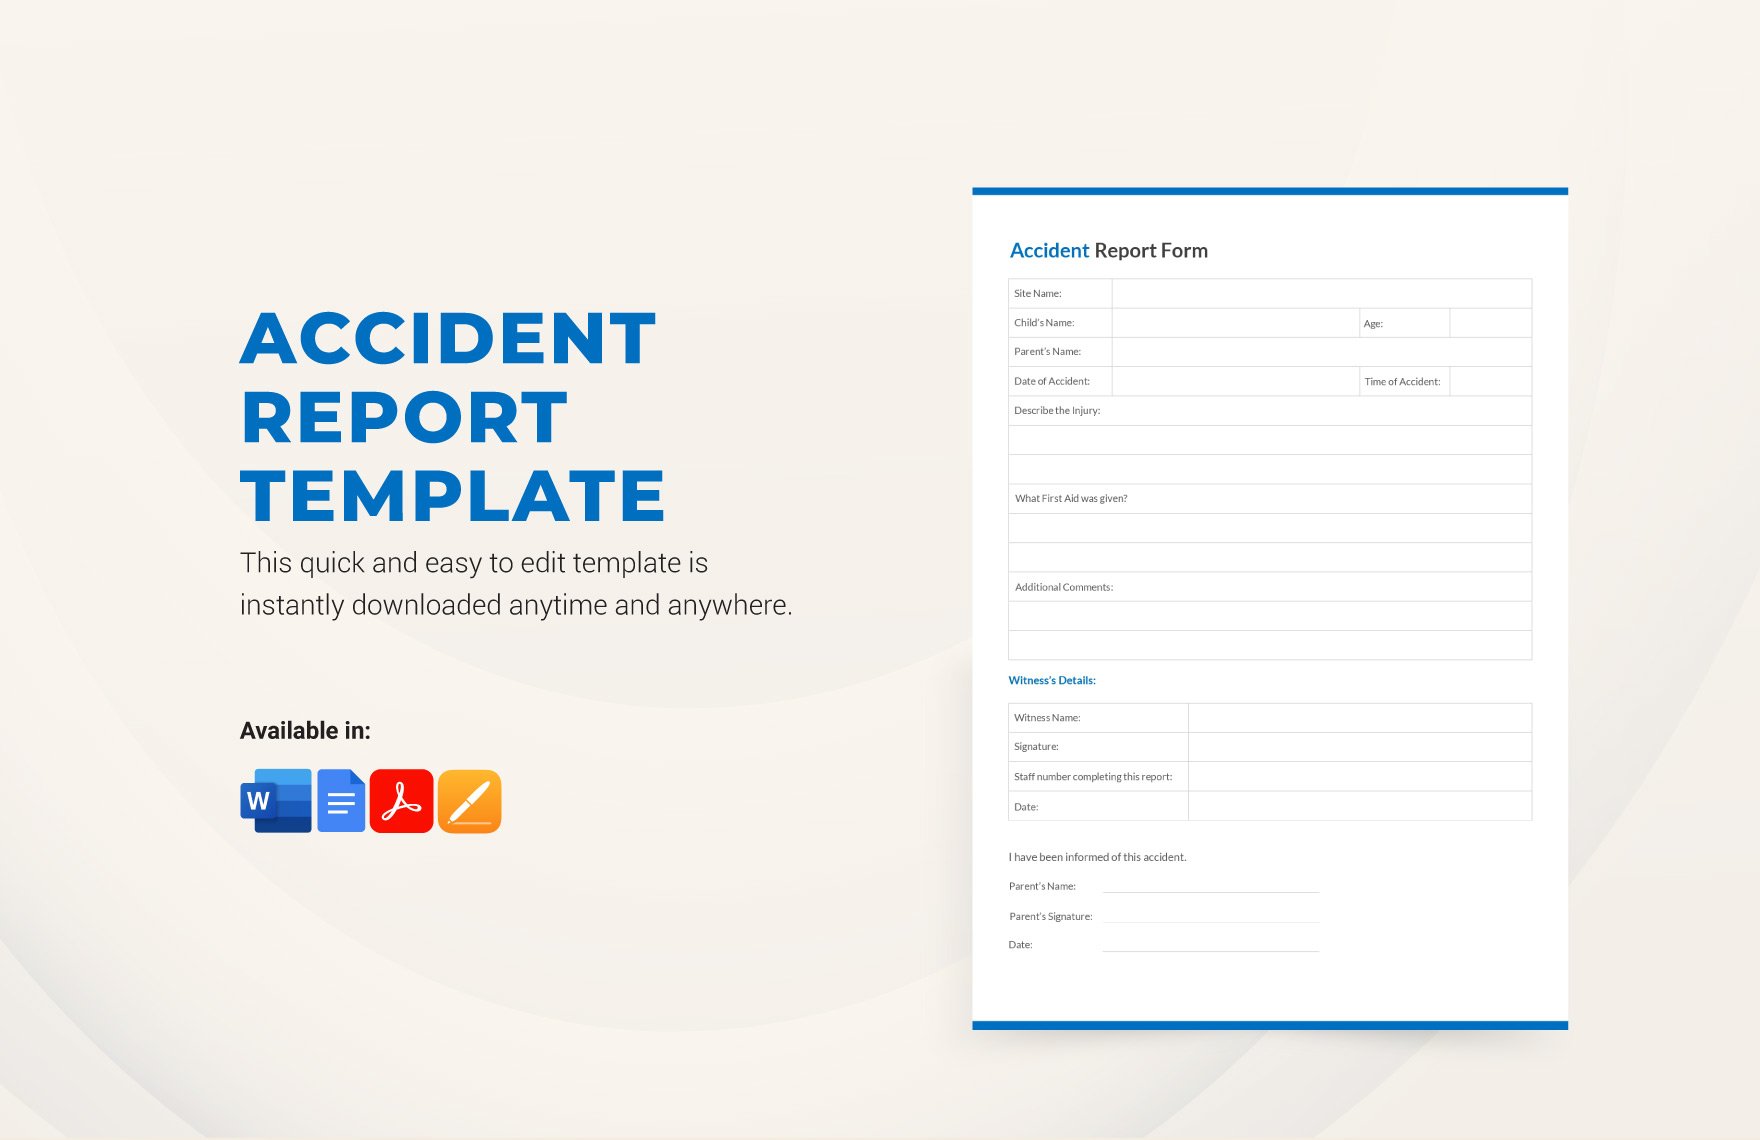 Accident Report Form template